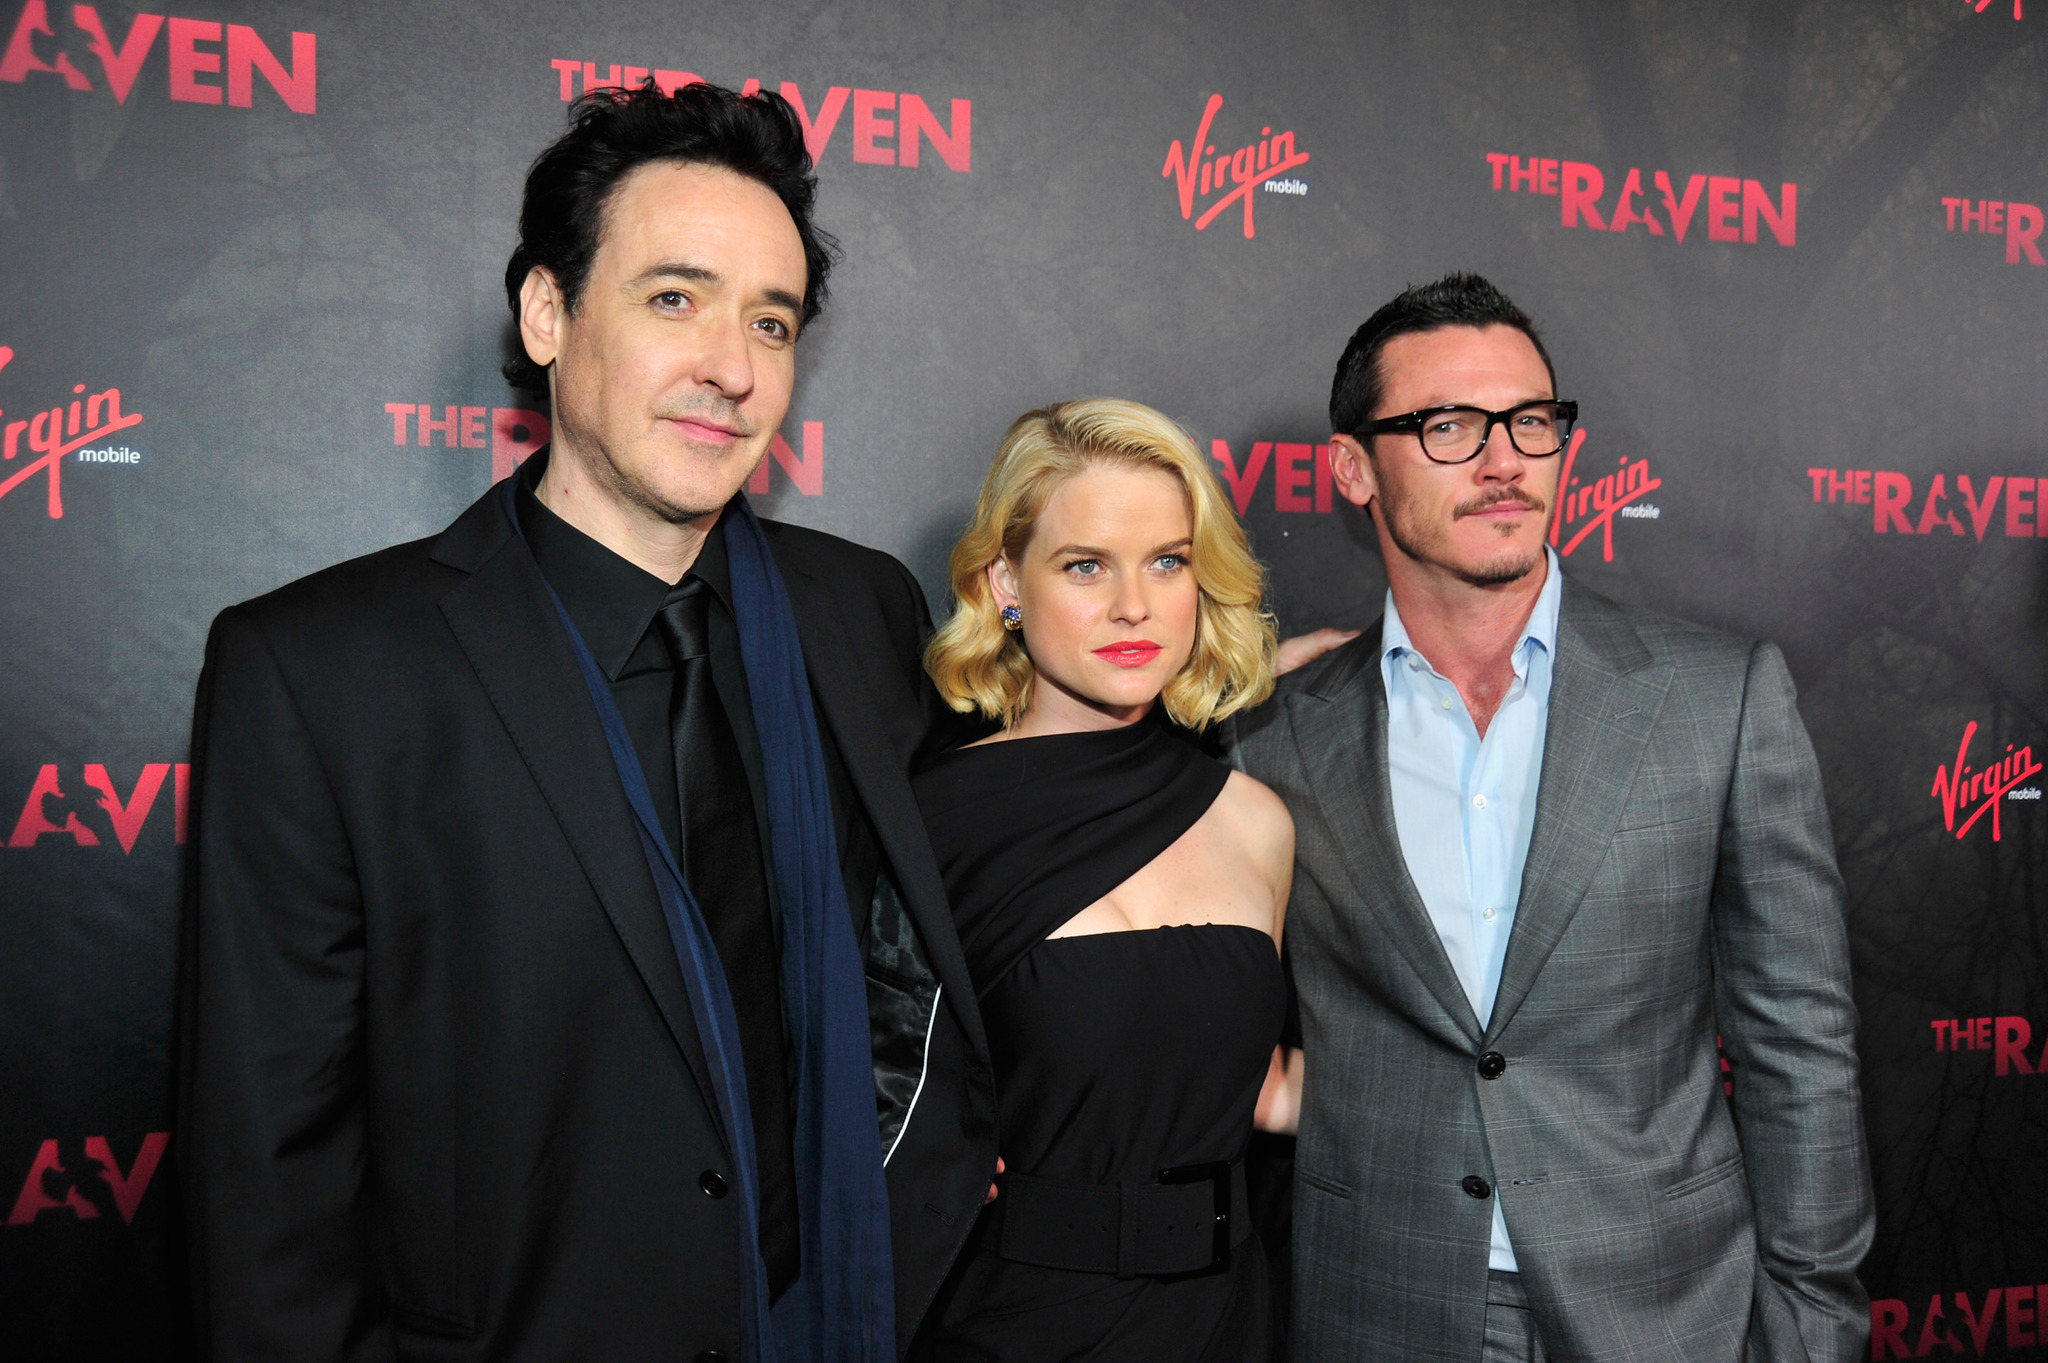 John Cusack, Alice Eve and Luke Evans at event of Varnas (2012)